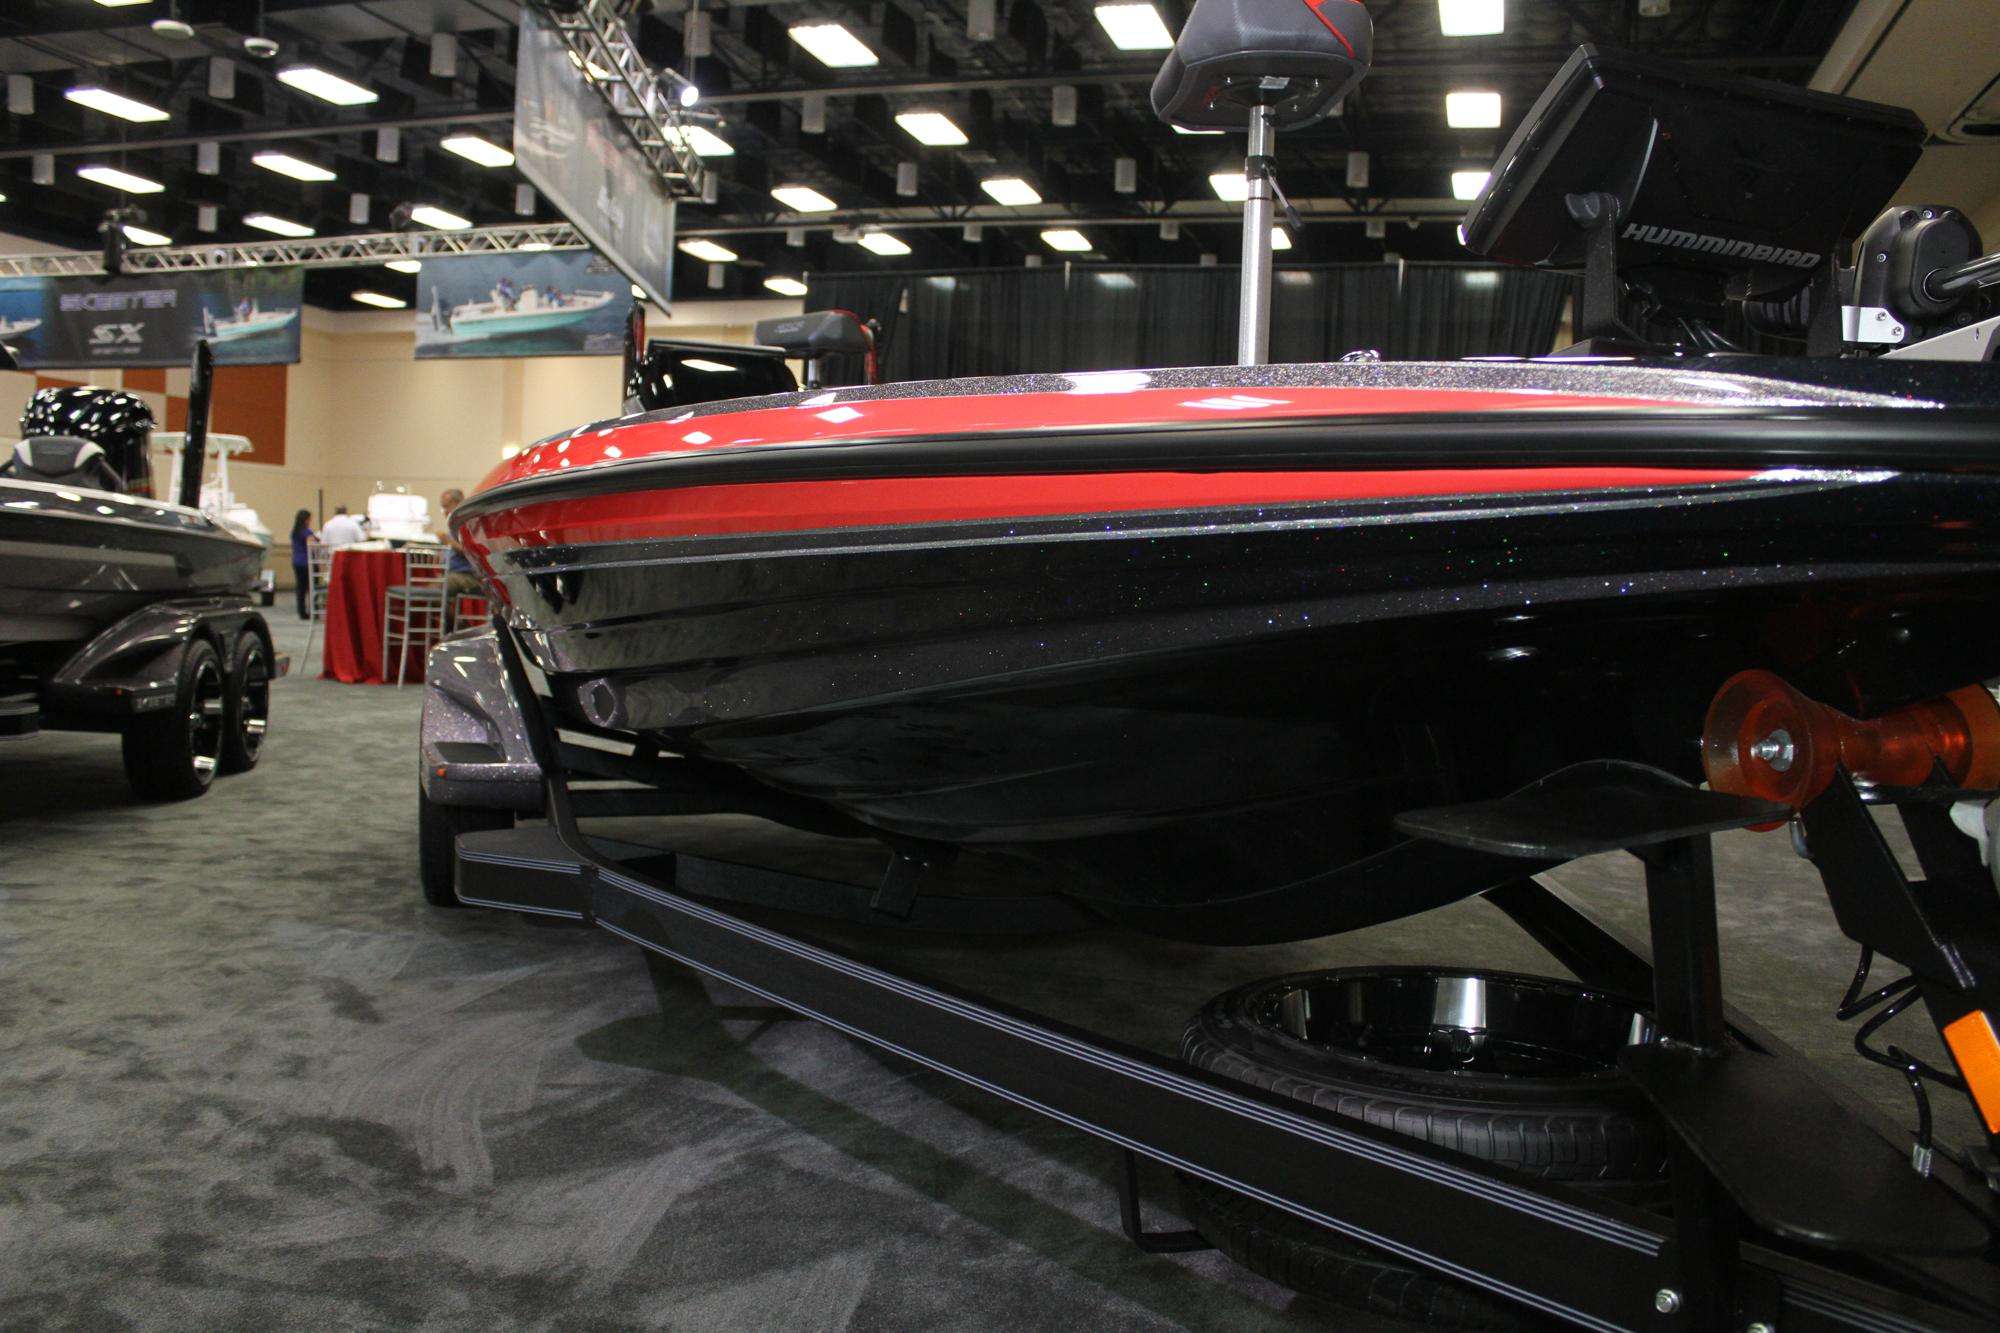 The starboard side of the Skeeter FXR20 shows the new design of the hull, including all new lines and body moldings â a completely redesigned boat from stem to stern.